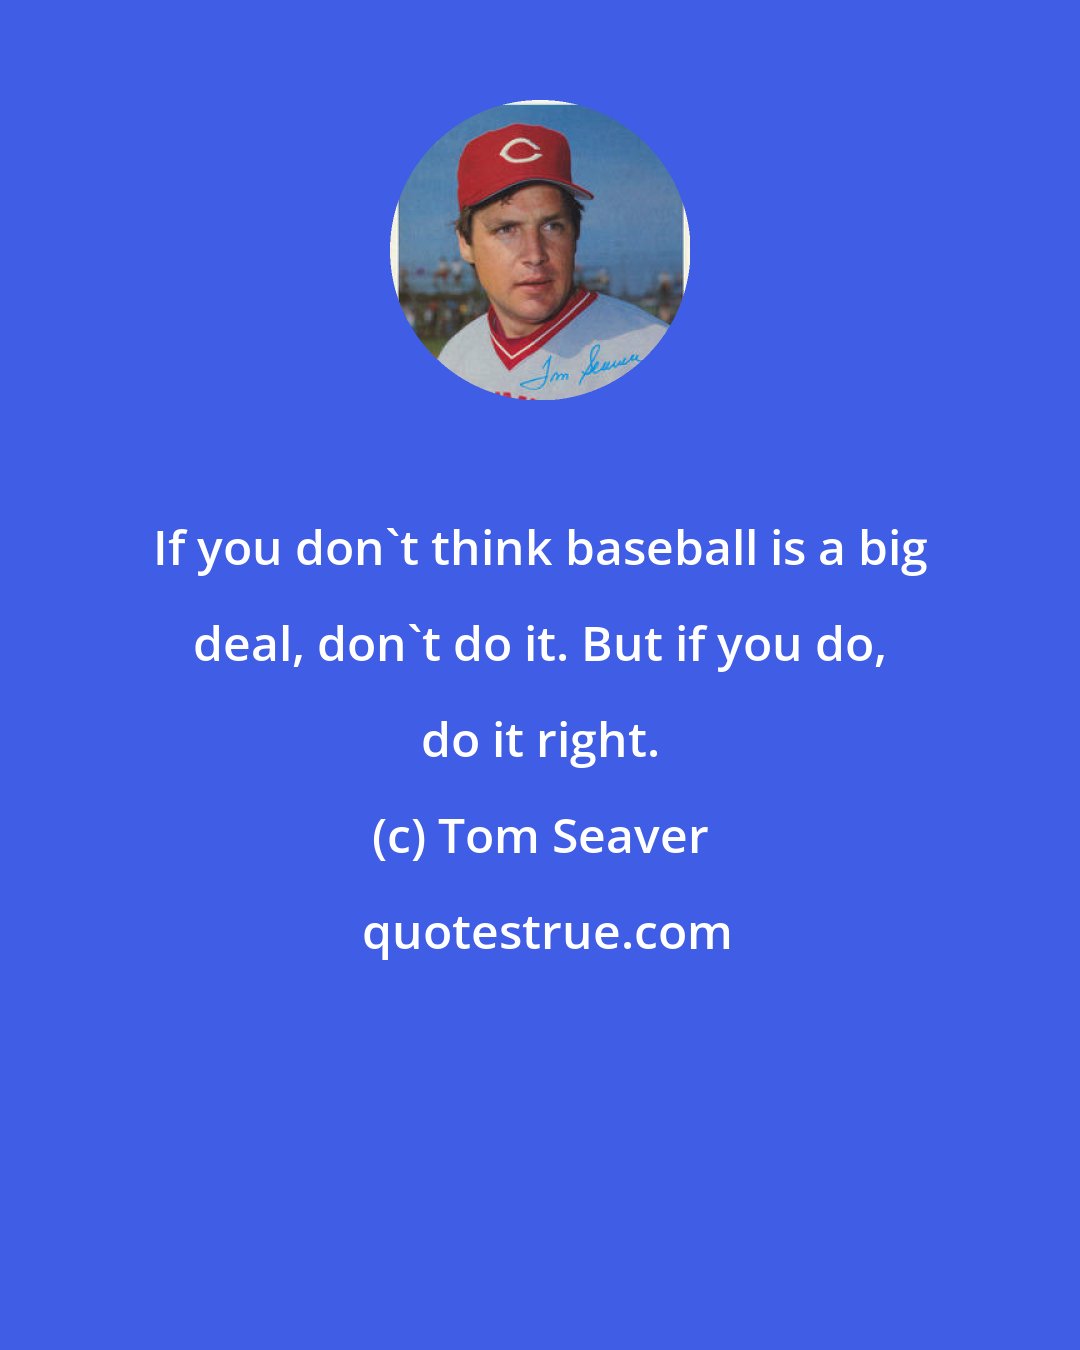 Tom Seaver: If you don't think baseball is a big deal, don't do it. But if you do, do it right.